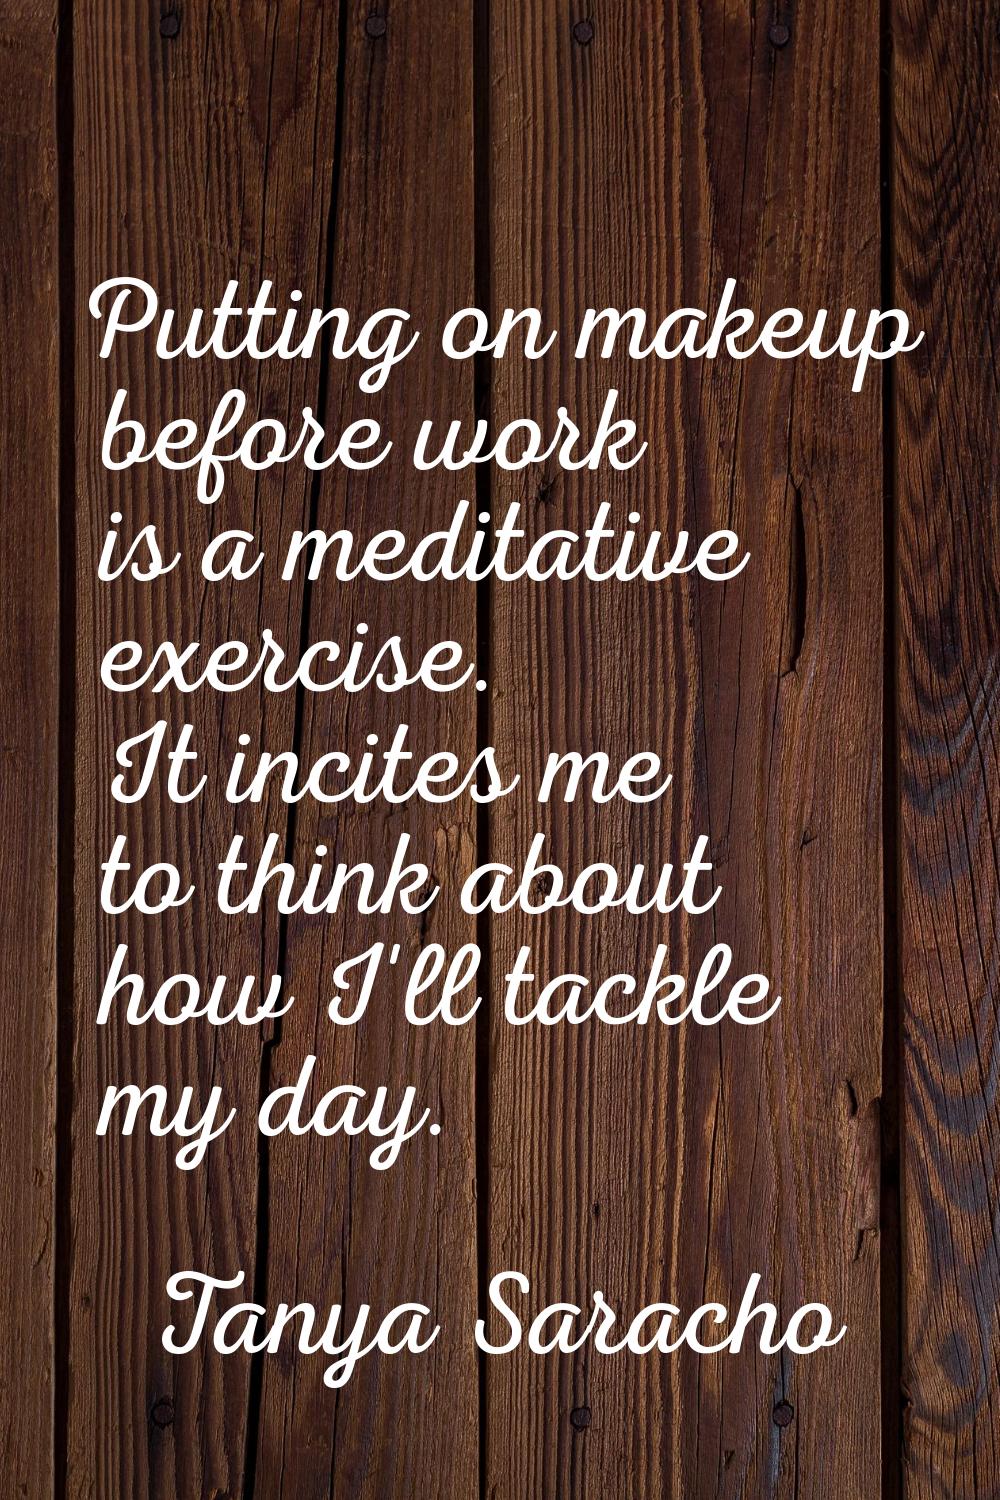 Putting on makeup before work is a meditative exercise. It incites me to think about how I'll tackl